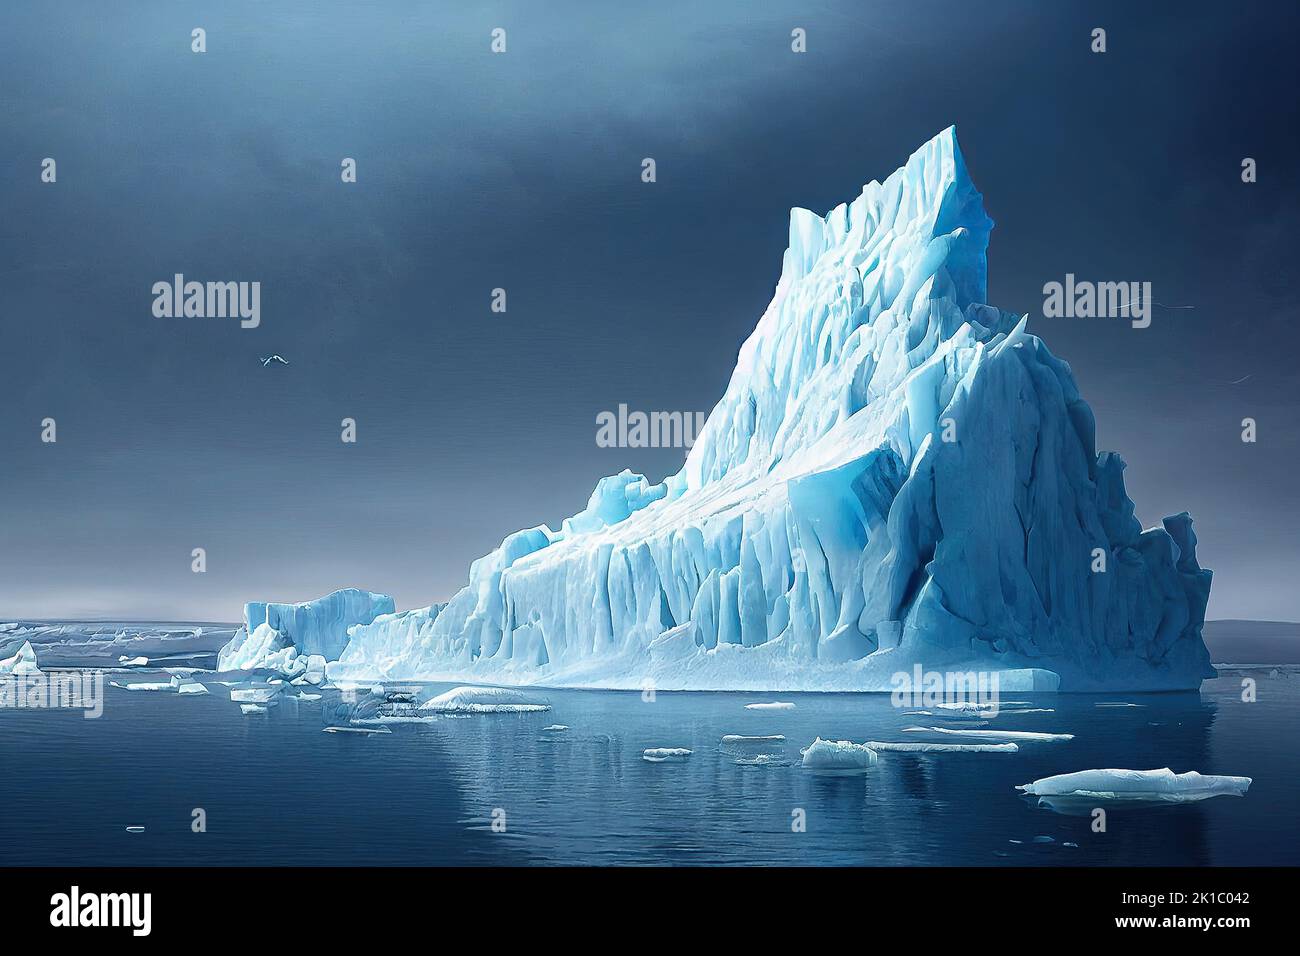 The arctic ocean at dawn, iceberg melting concept. Global warming and climate change. 3D illustration and digital painting. Stock Photo